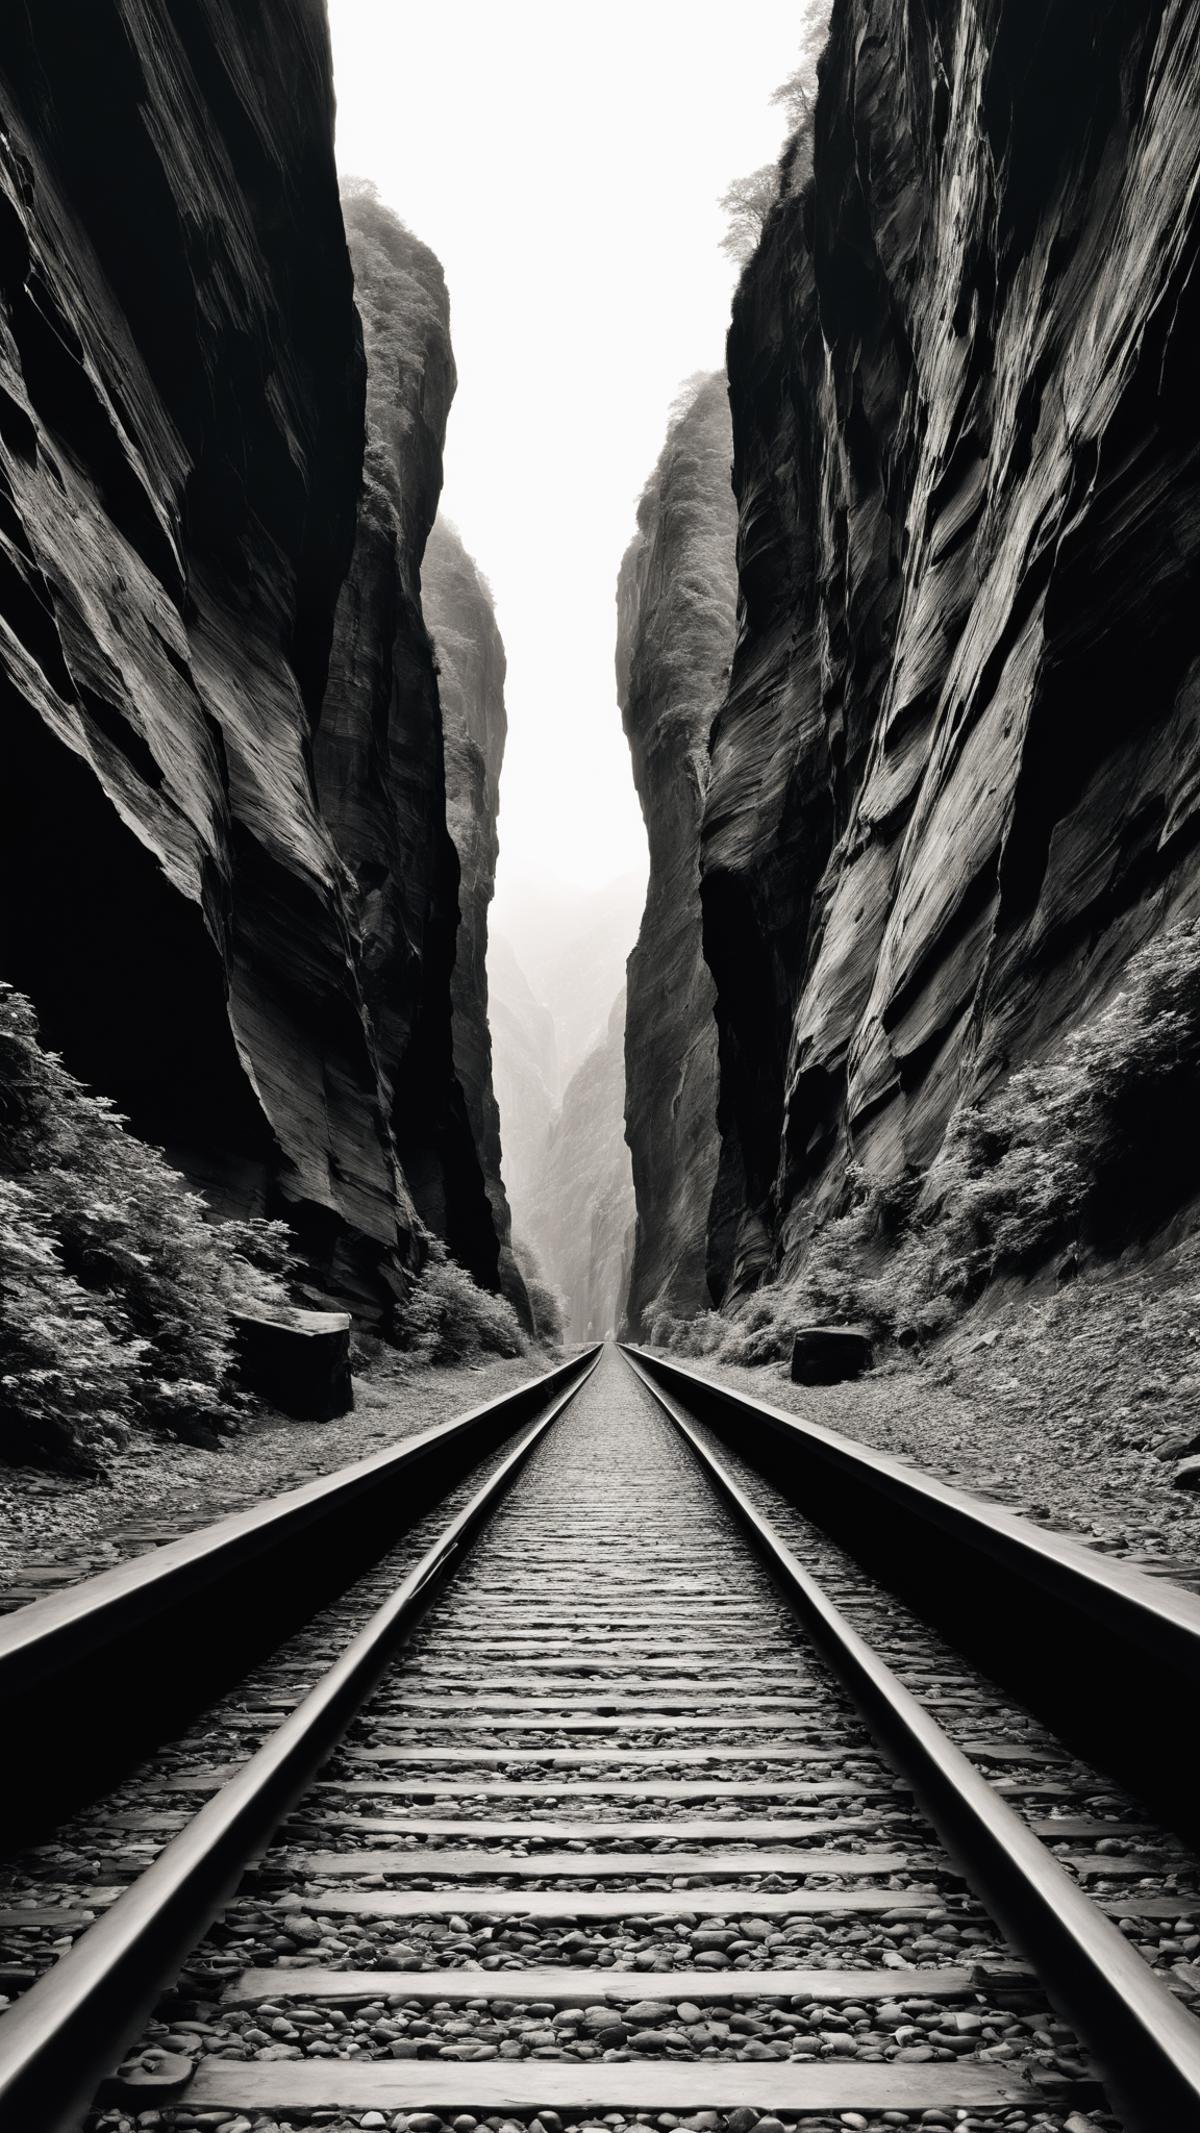 A black and white image of a train track between two rocky cliffs.